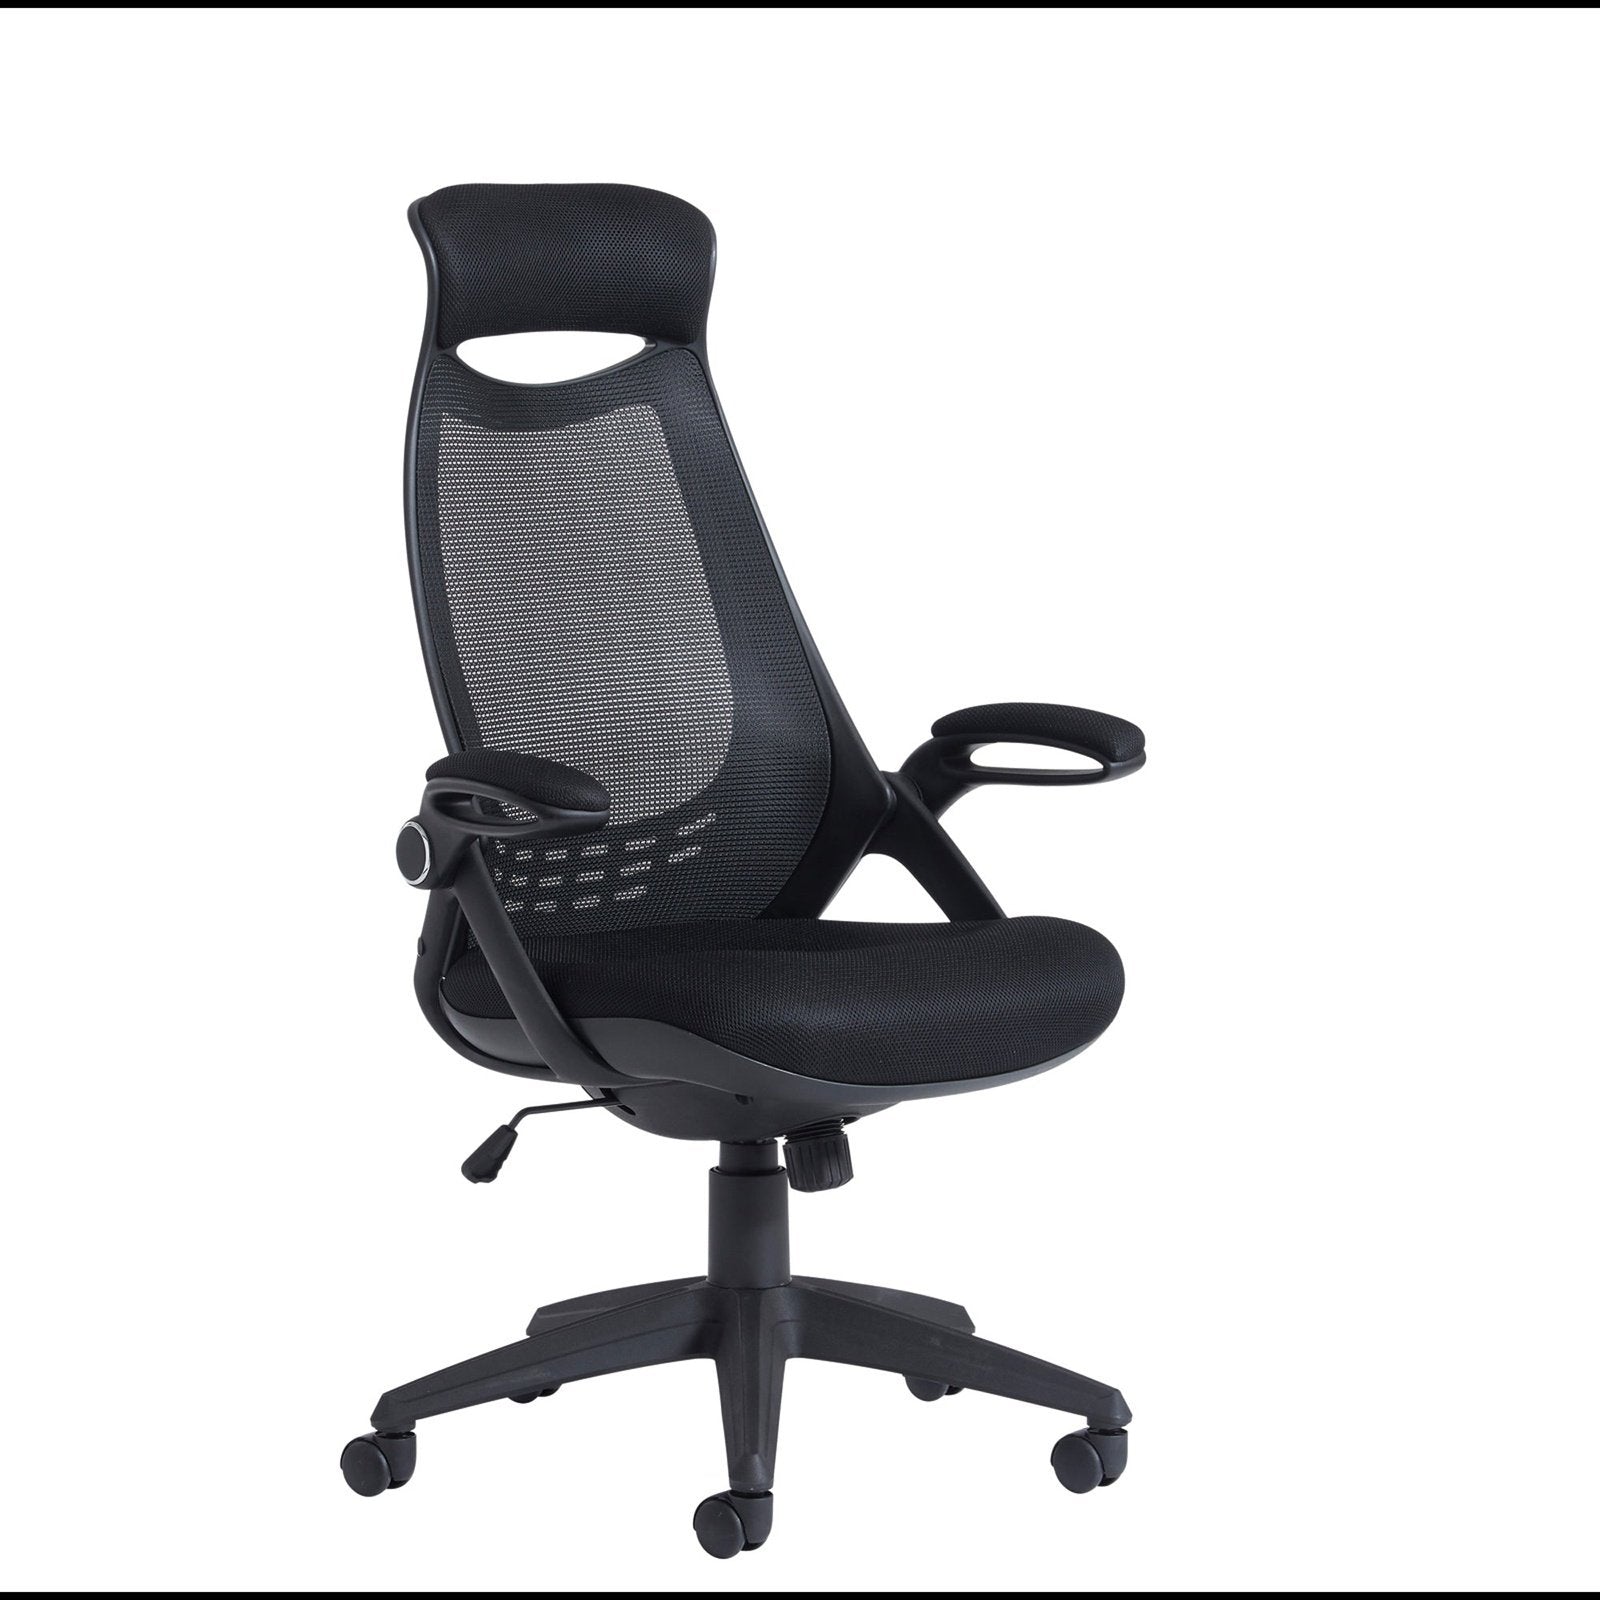 Tuscan mesh high back chair with head support - black - Office Products Online